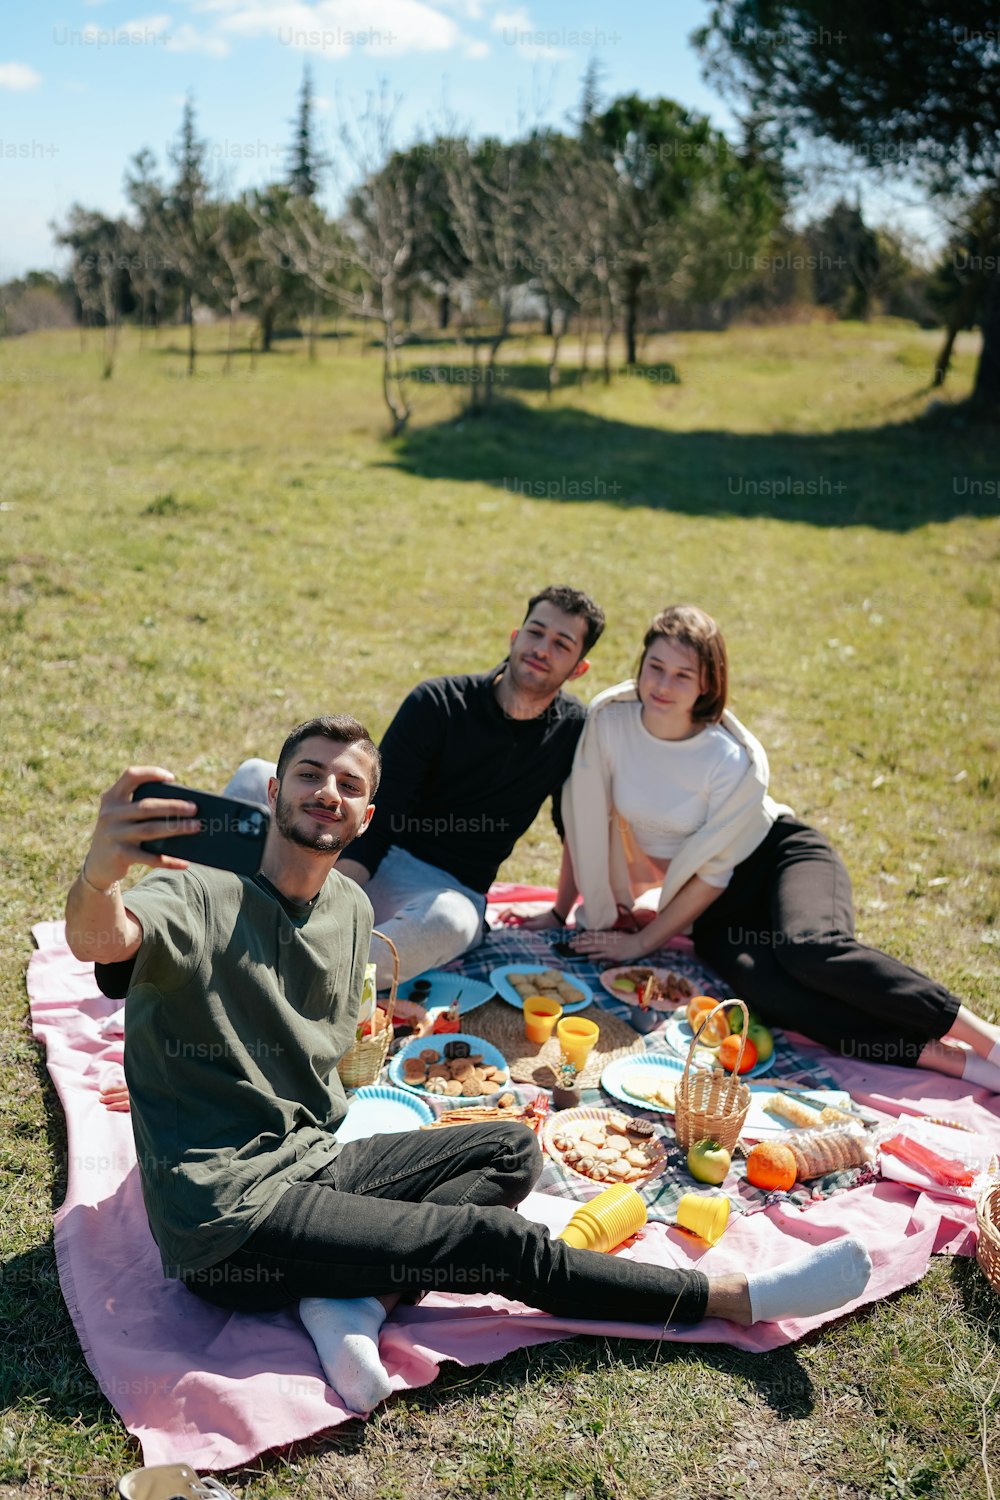 a group of people sitting on a blanket in a field